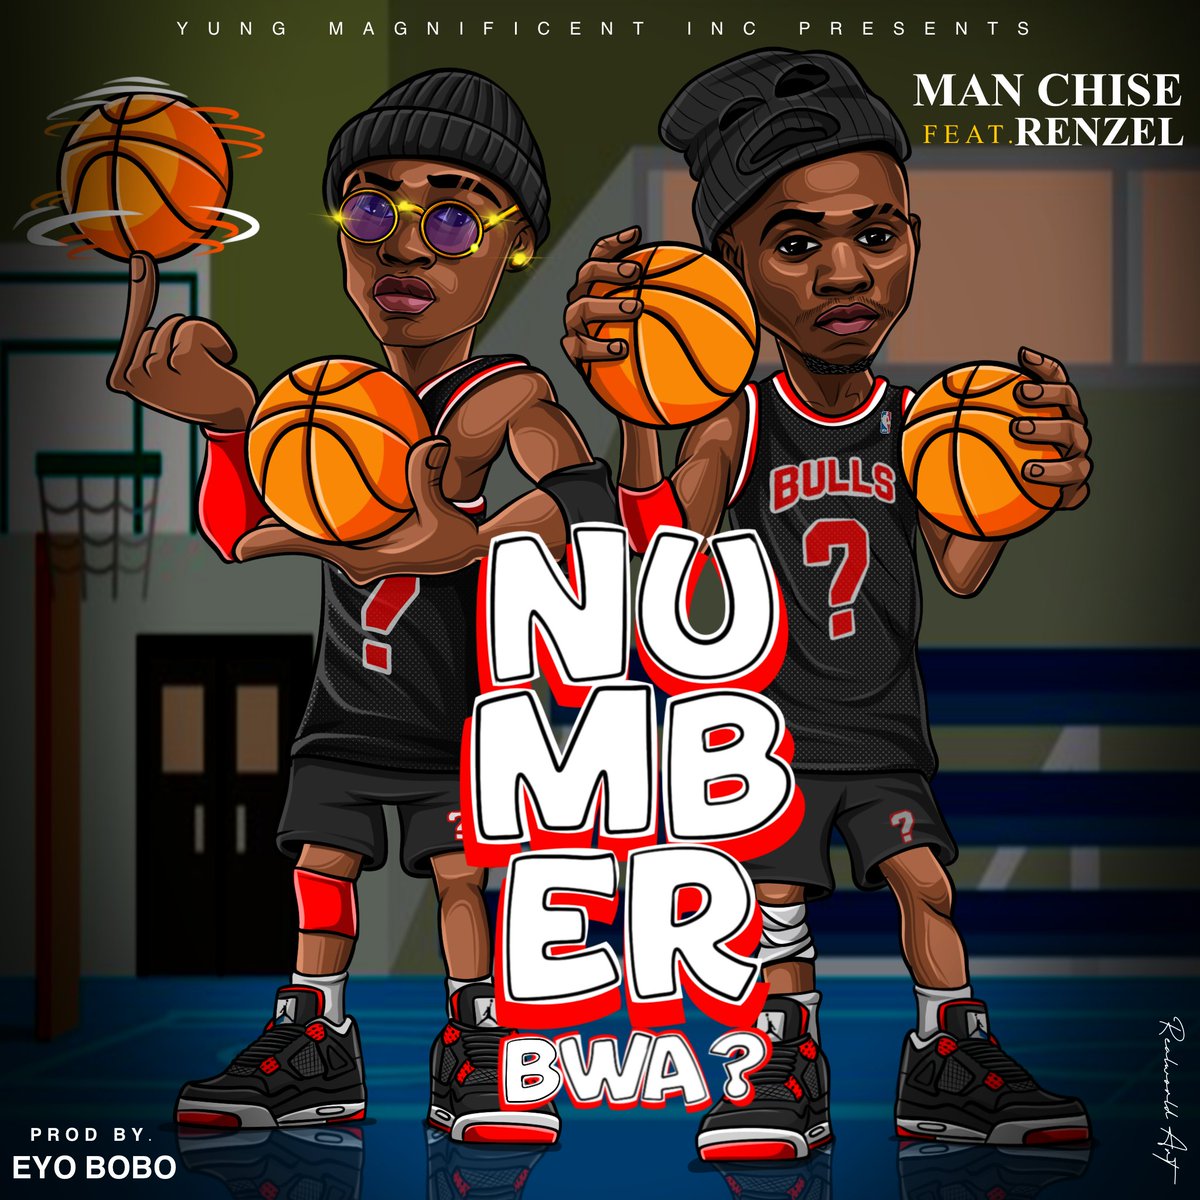 Number BWA by man chise feat Renzel‼️. Hip Hop fans are you READY??🚨🚨